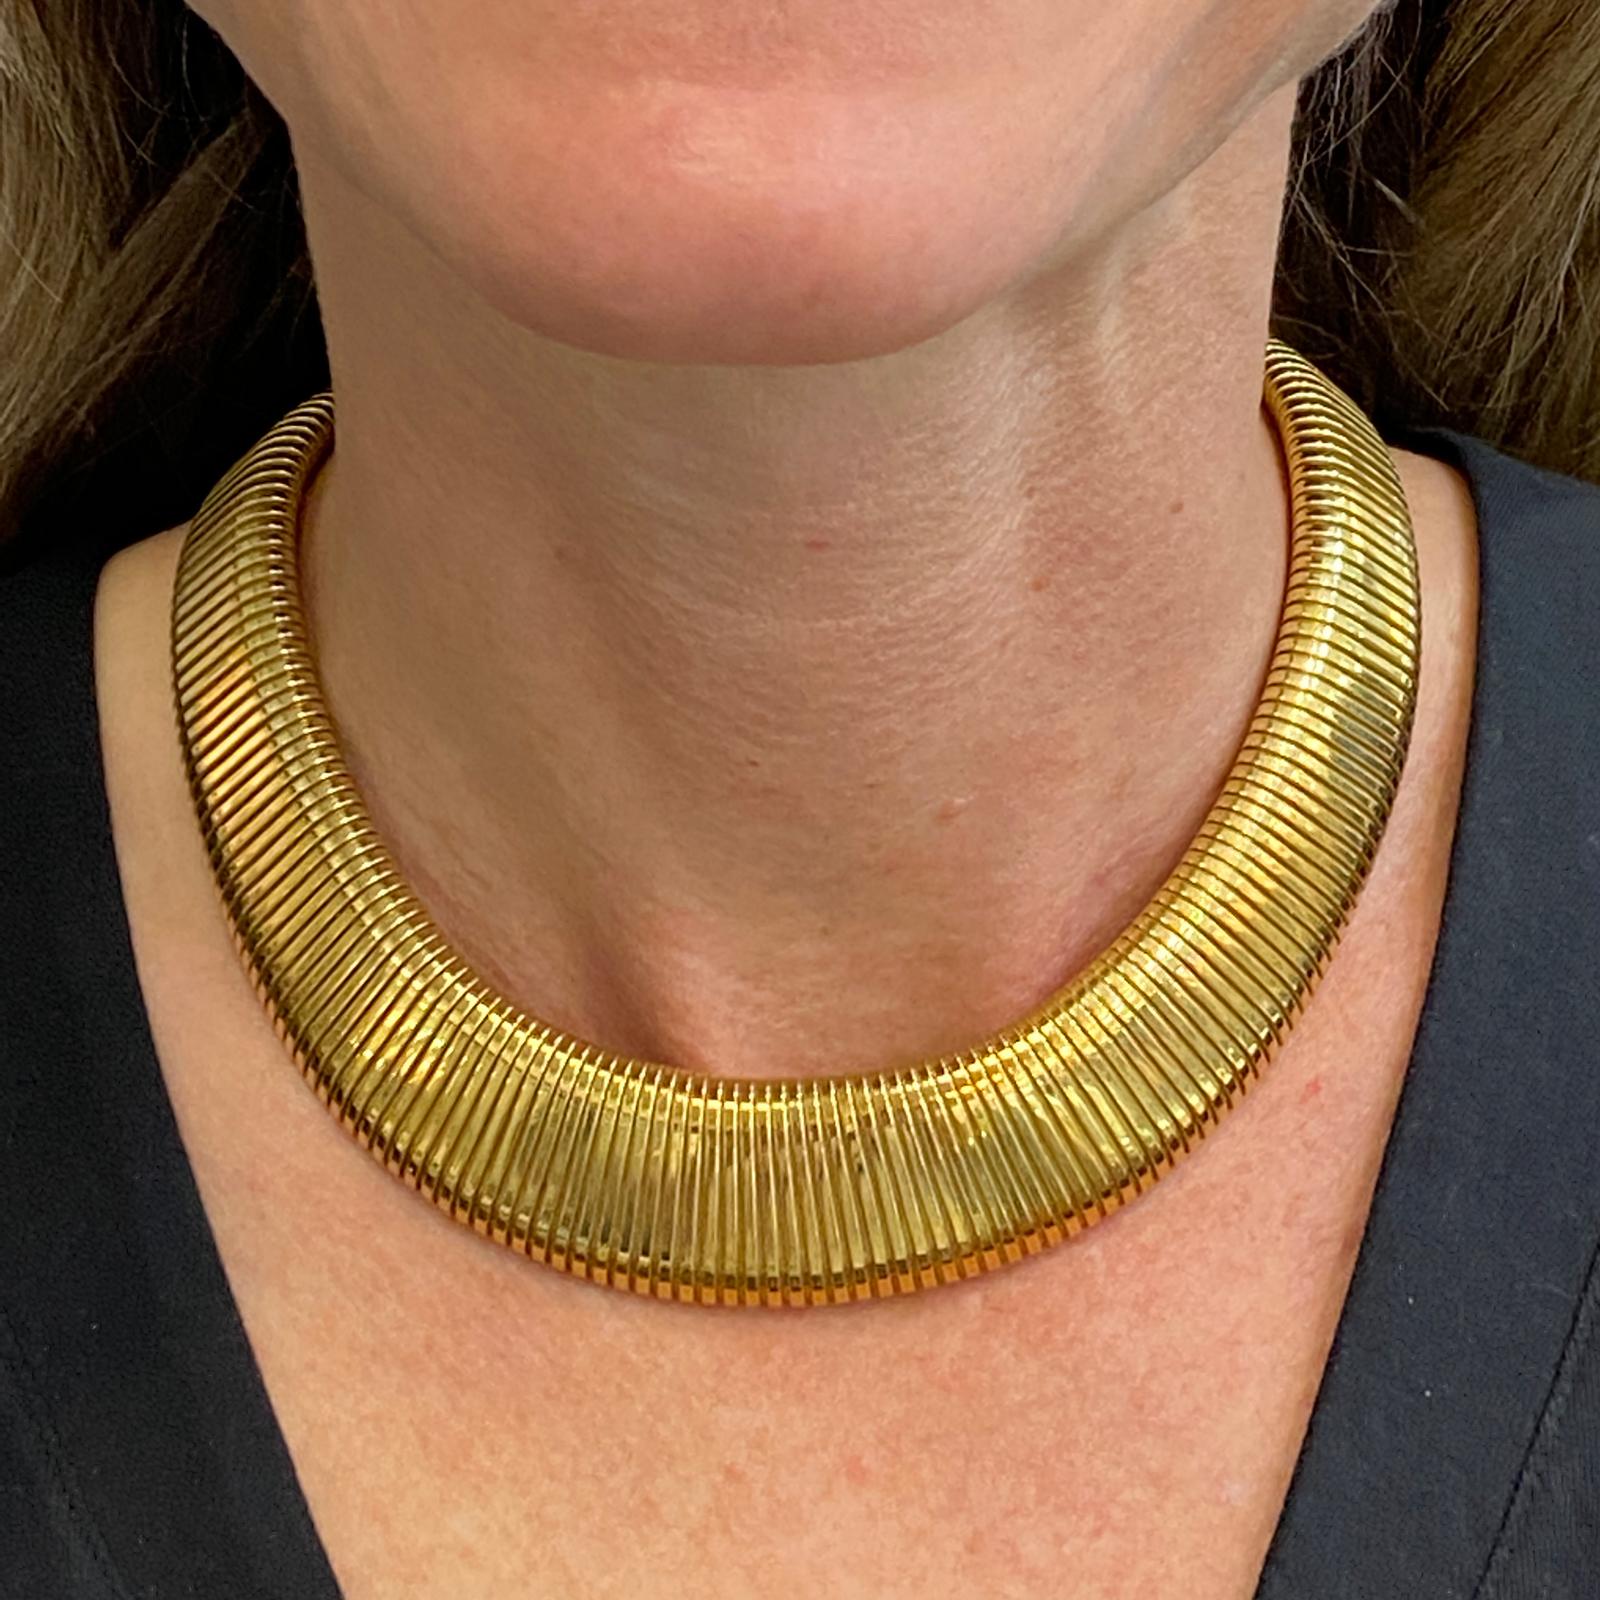 Impressive Italian tubogas necklace fashioned in 18 karat yellow gold. The graduated flexible necklace measures .50 -1.0 inches in width, and measures 16 inches in length.